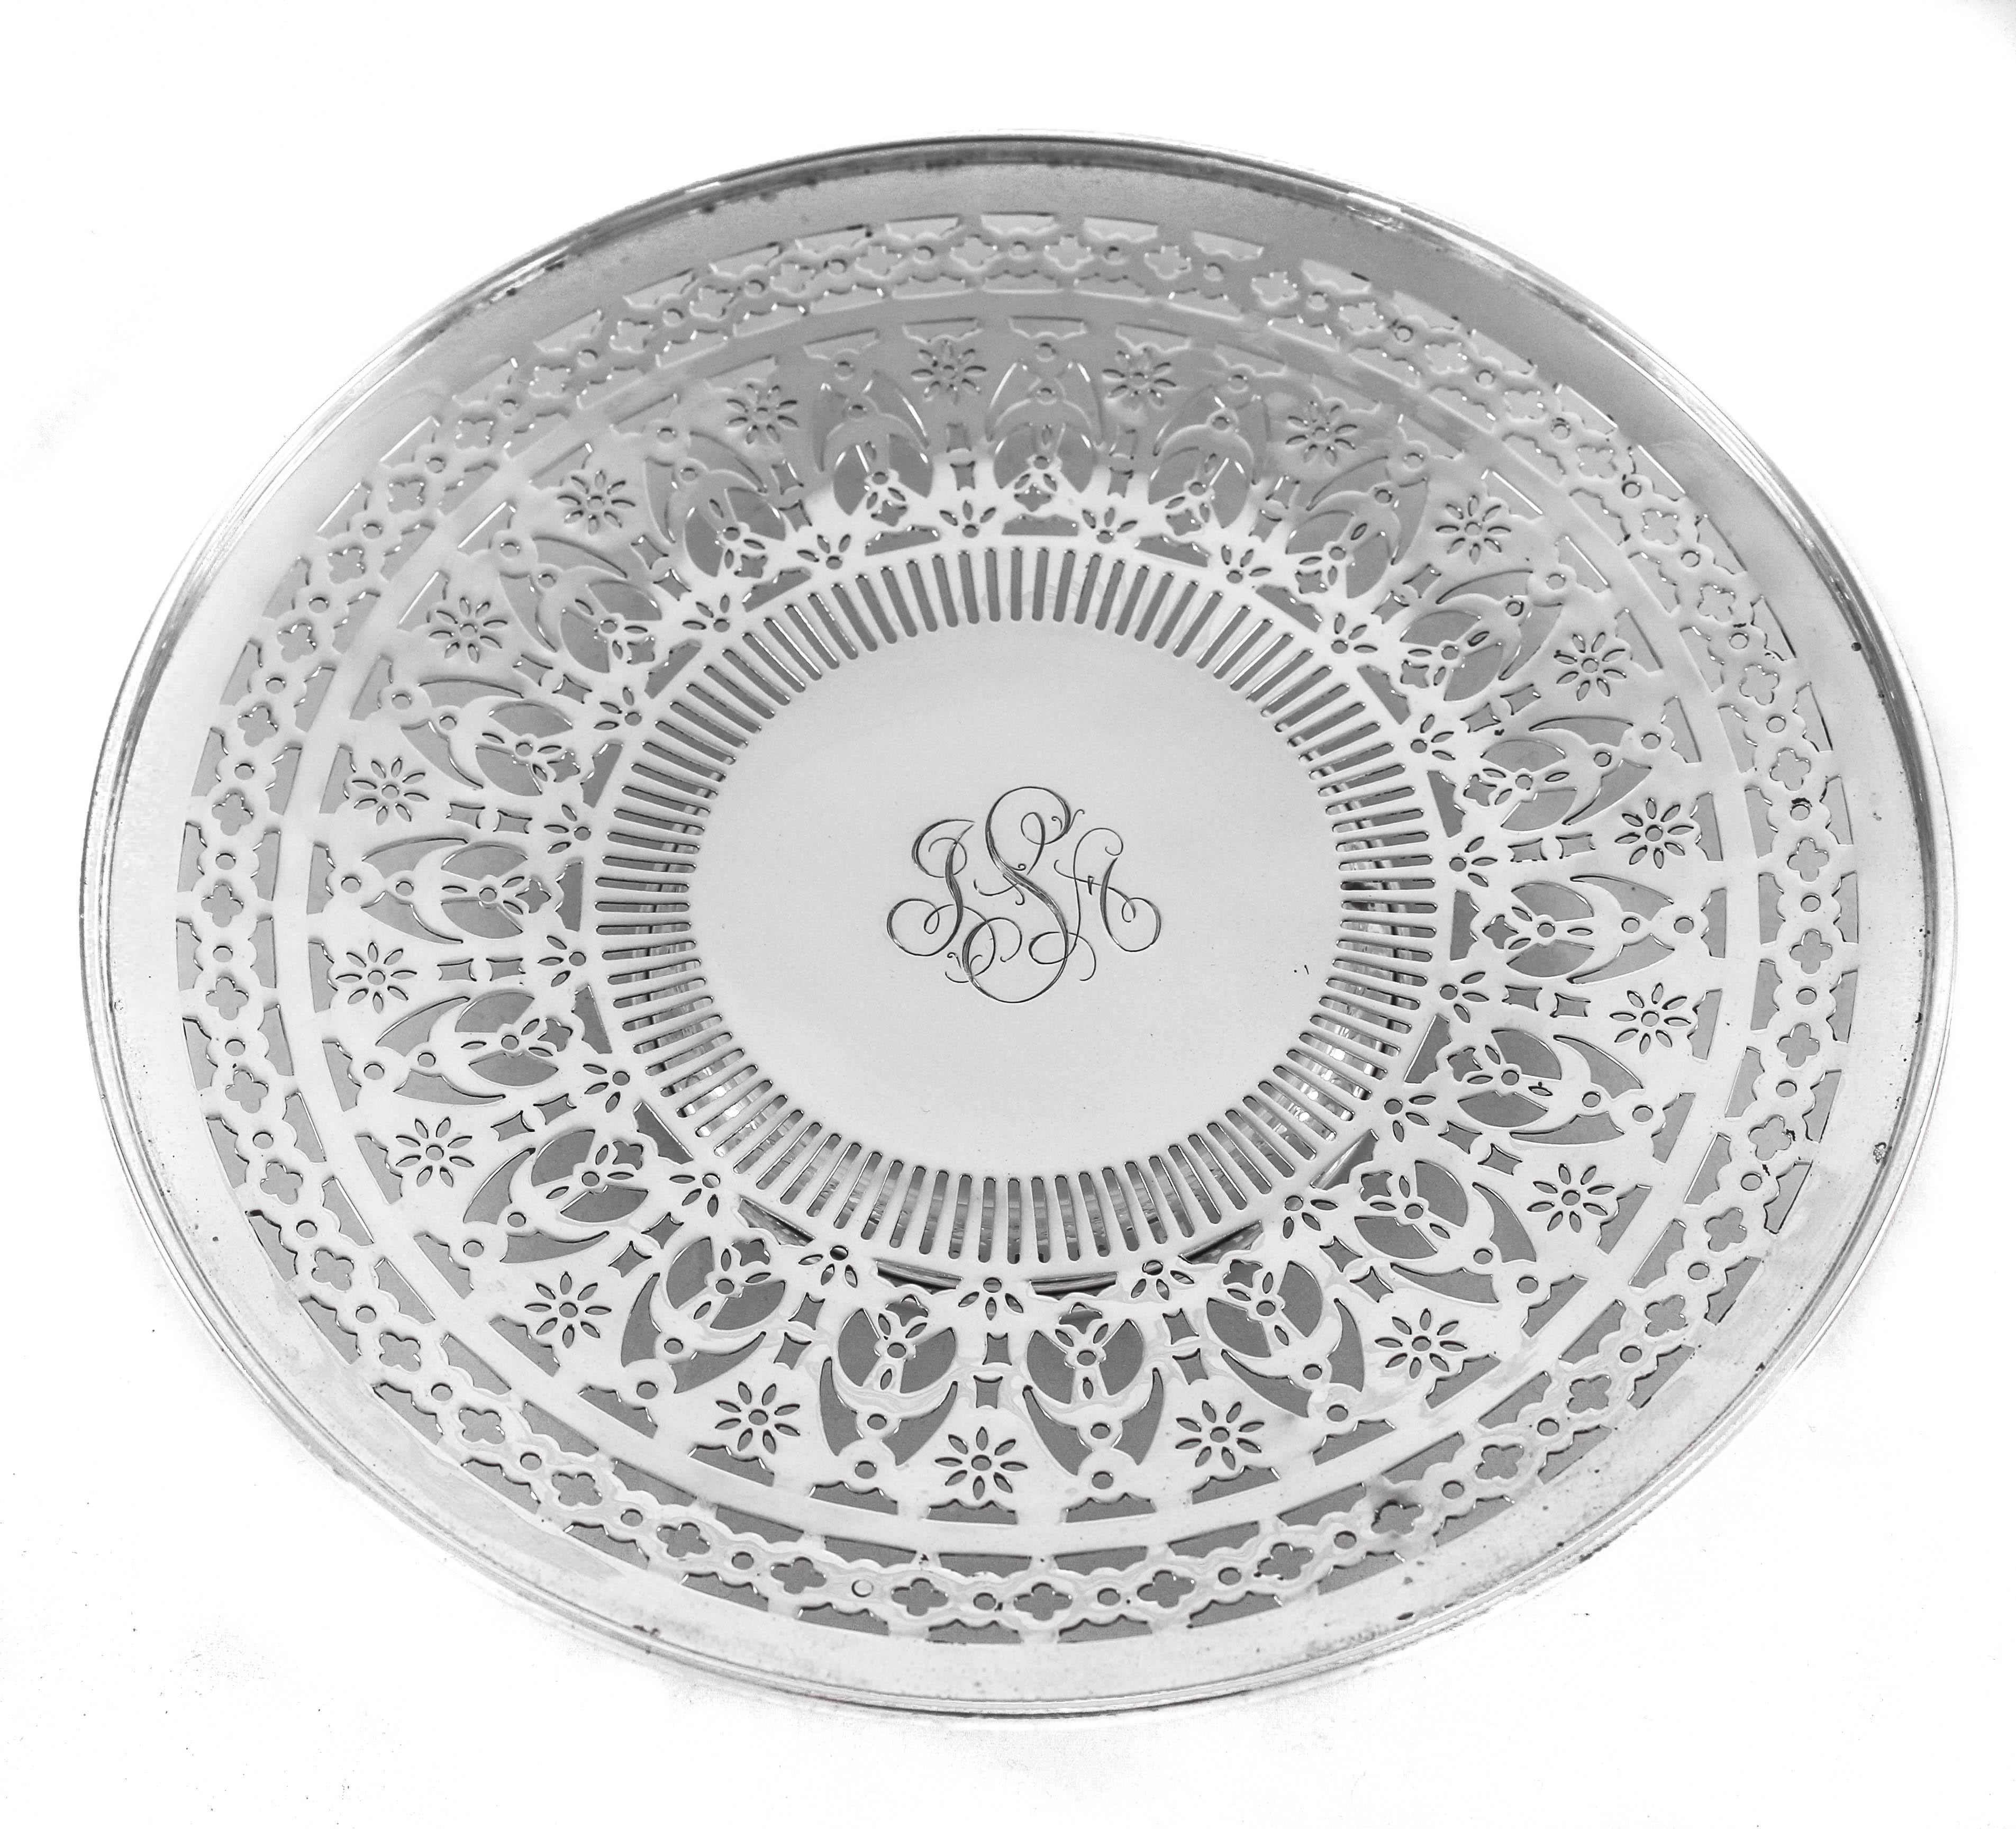 Look at the beautiful pierced work on these sterling plate; truly exceptional. It stands on a pedestal, raising it off the surface. All different patterns of cutouts come together to make this reticulated piece a sight for sore eyes.